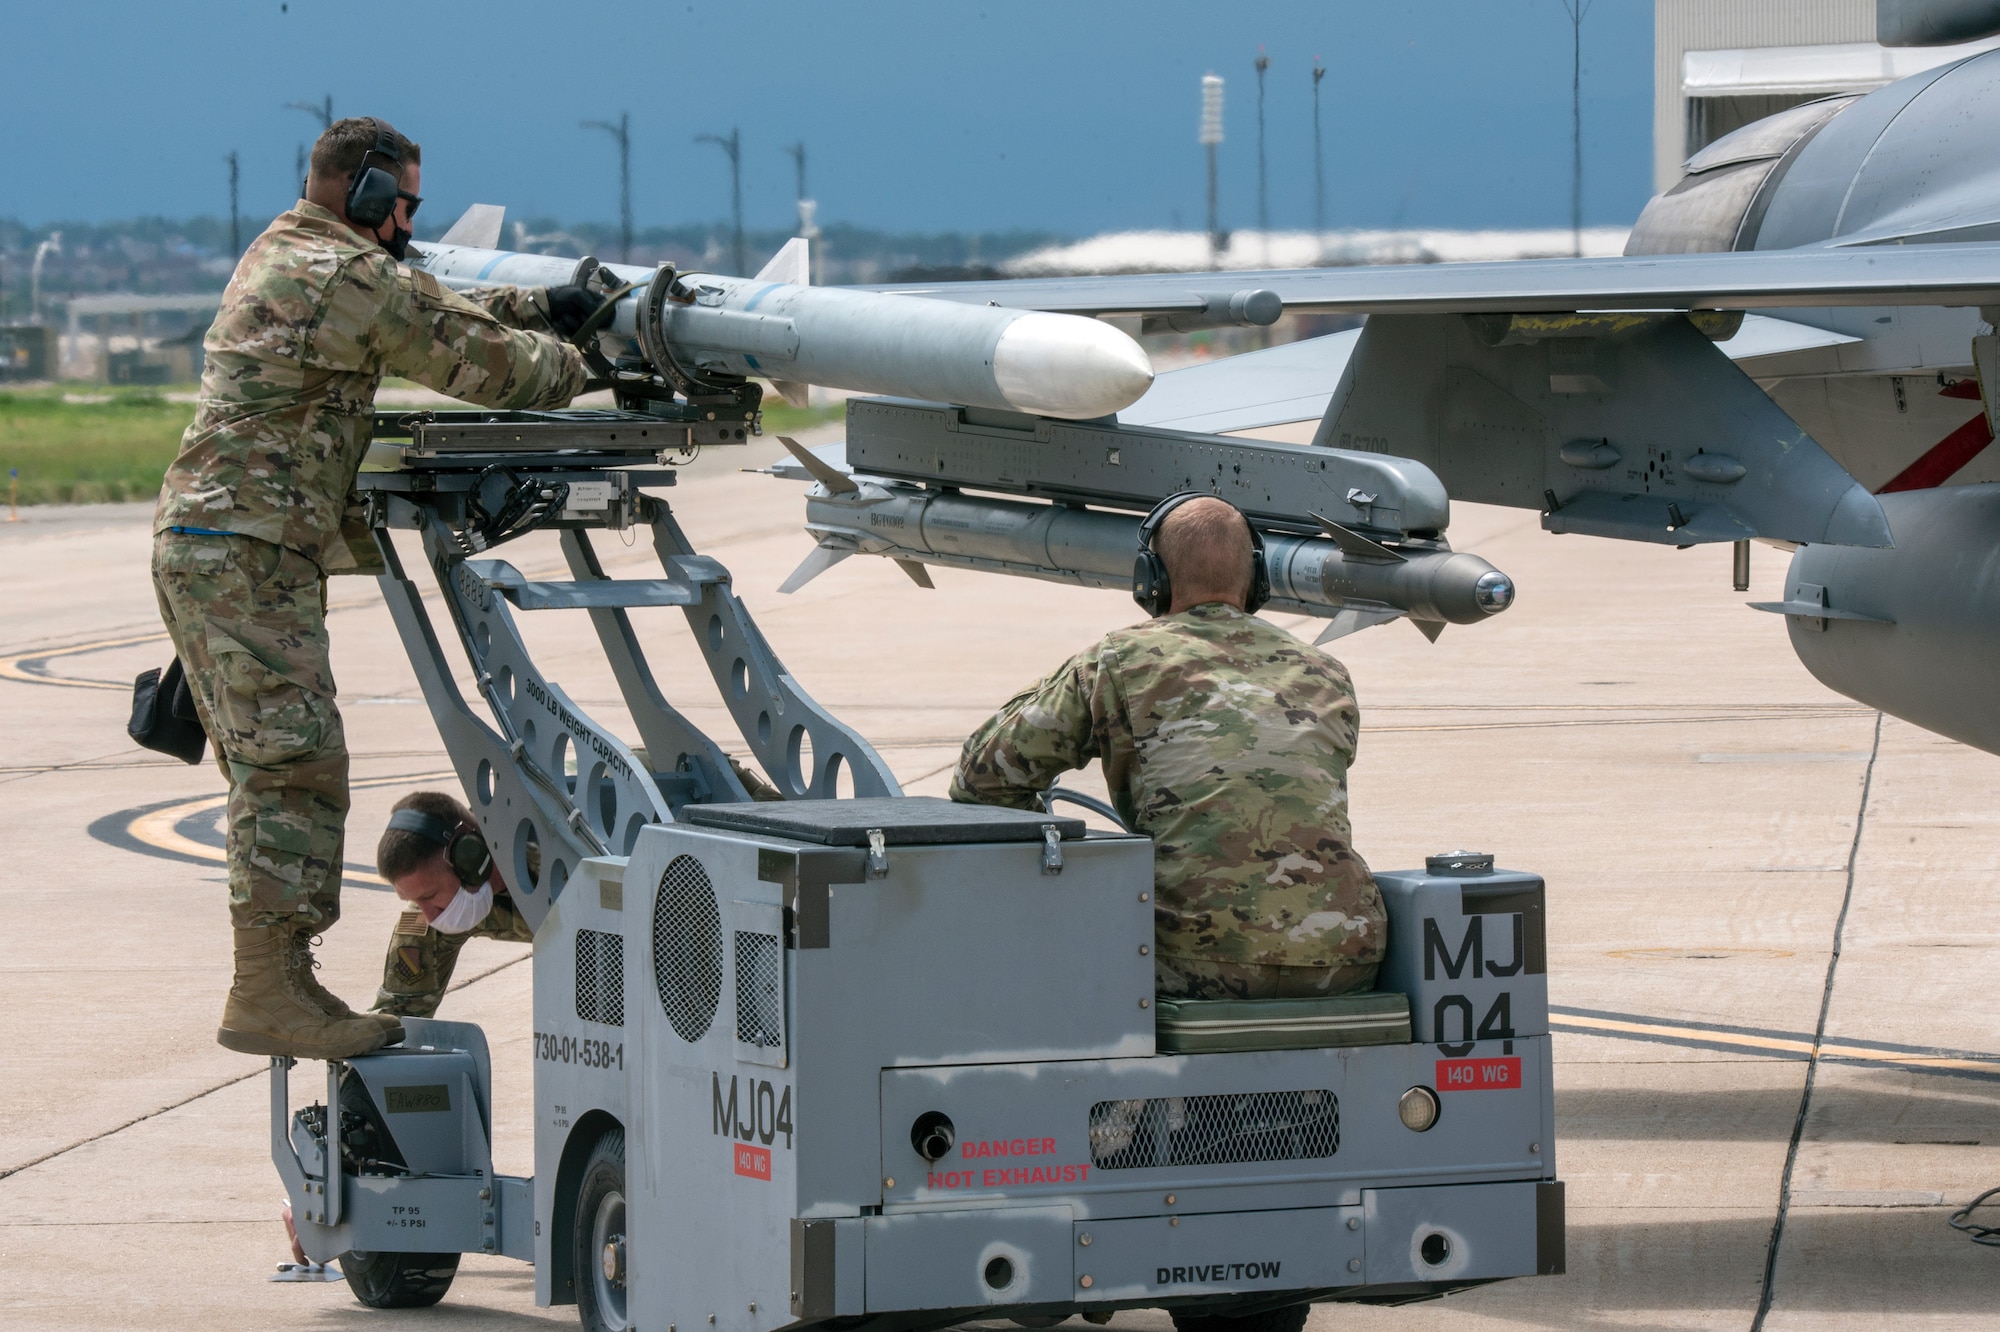 2 Airmen loading a missile on the wing of an F-16